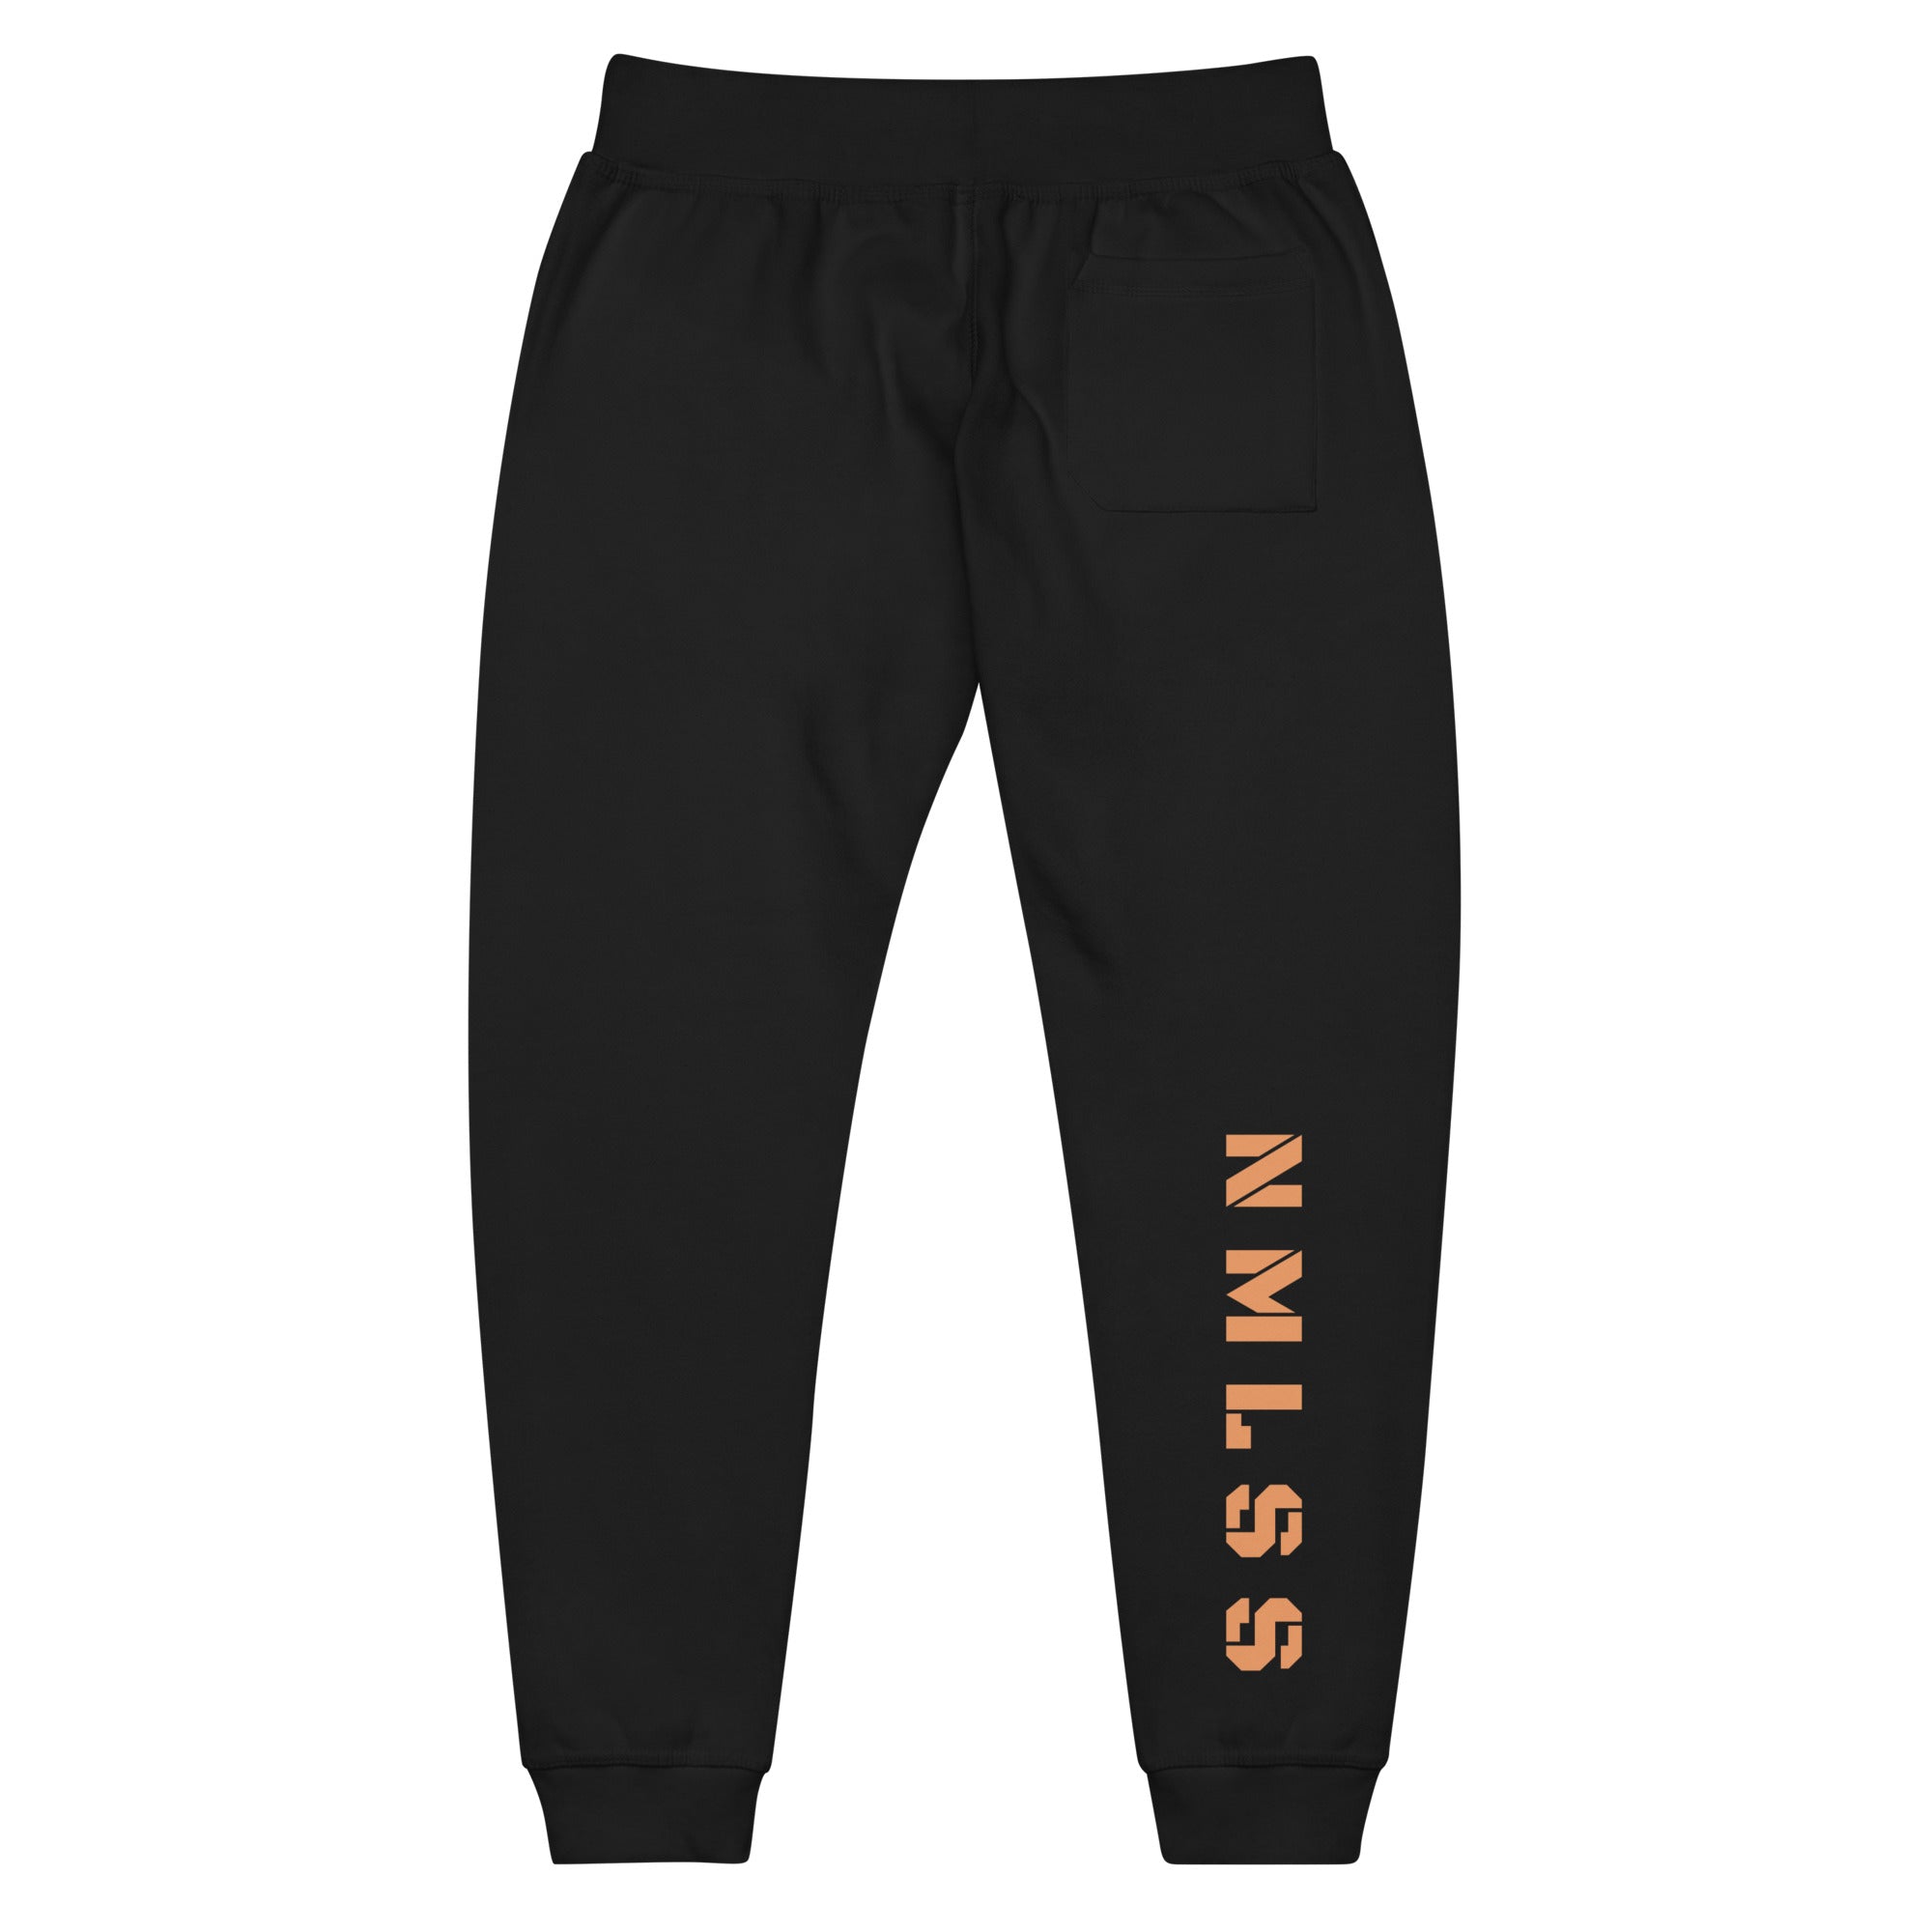 NAMELESS SPECIAL OPS SWEATPANTS - BLACK